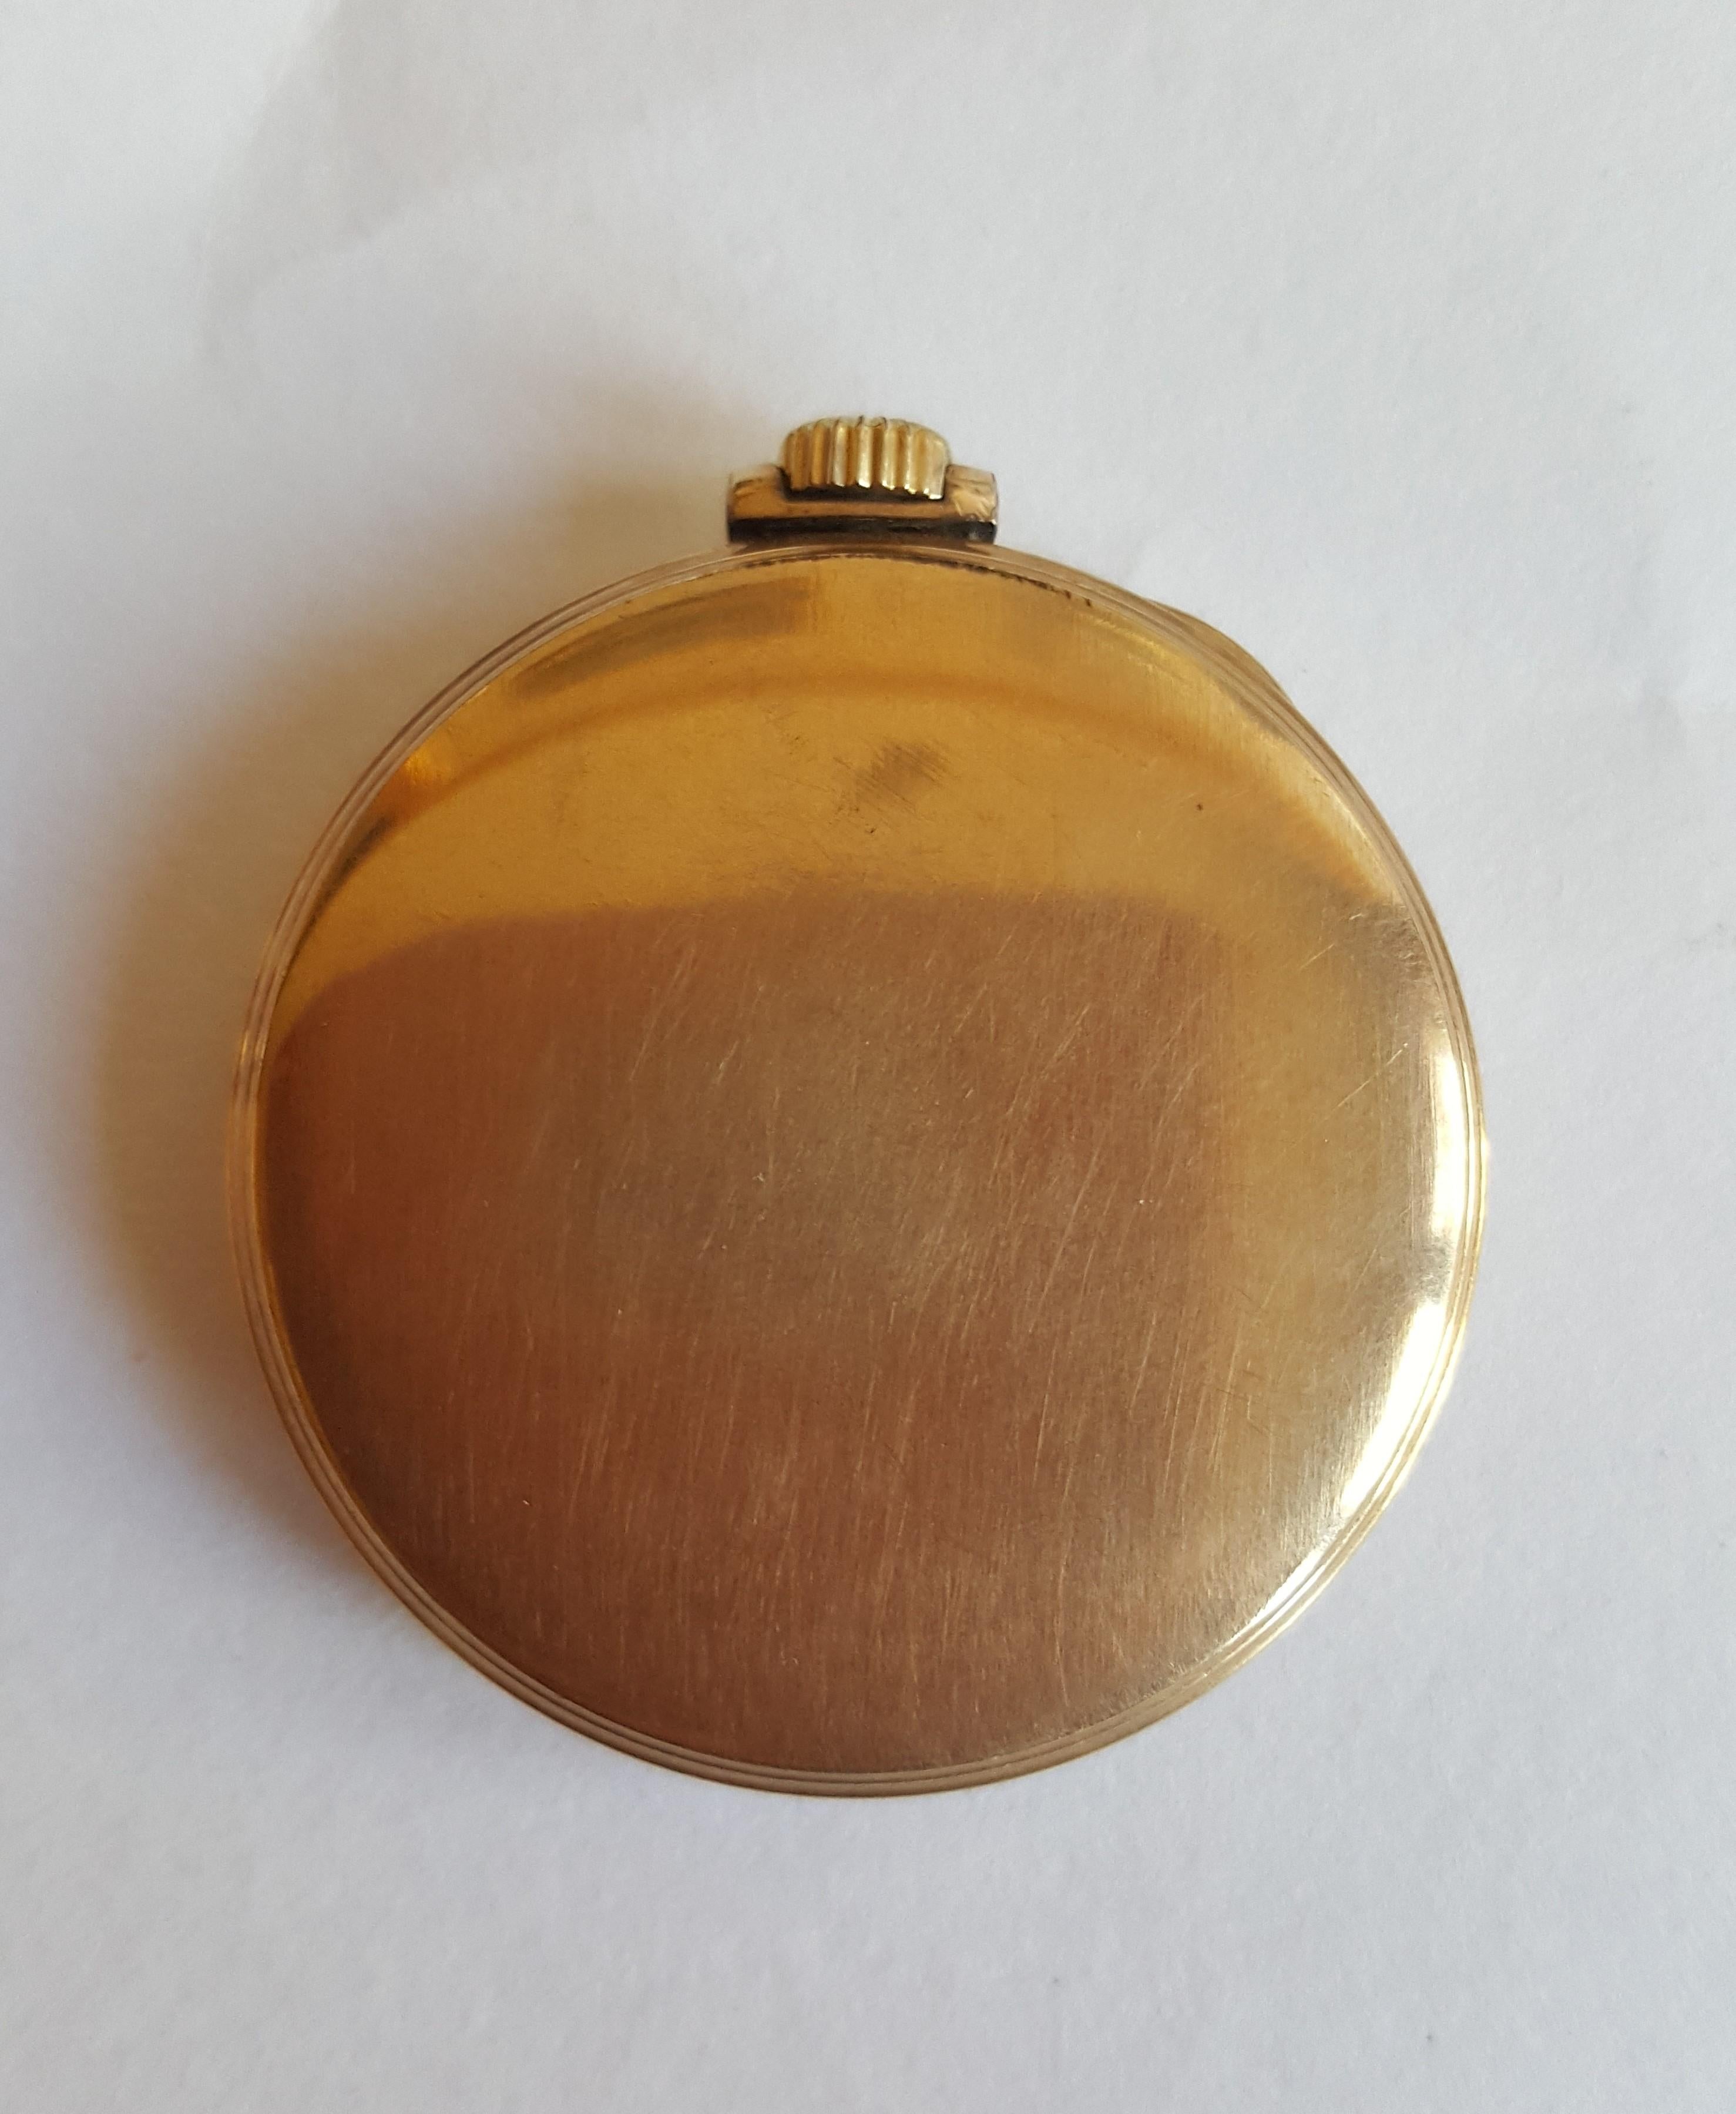 1940 Vintage Waltham Premier Pocket Watch, Working, 17 Jewels, Size 12S, 10k Gold Plate, Champagne Face, Excellent Condition, #30589855, champagne face, gold numerals, seconds dial, 43mm diameter of case. 

The Waltham Watch Company, also known as